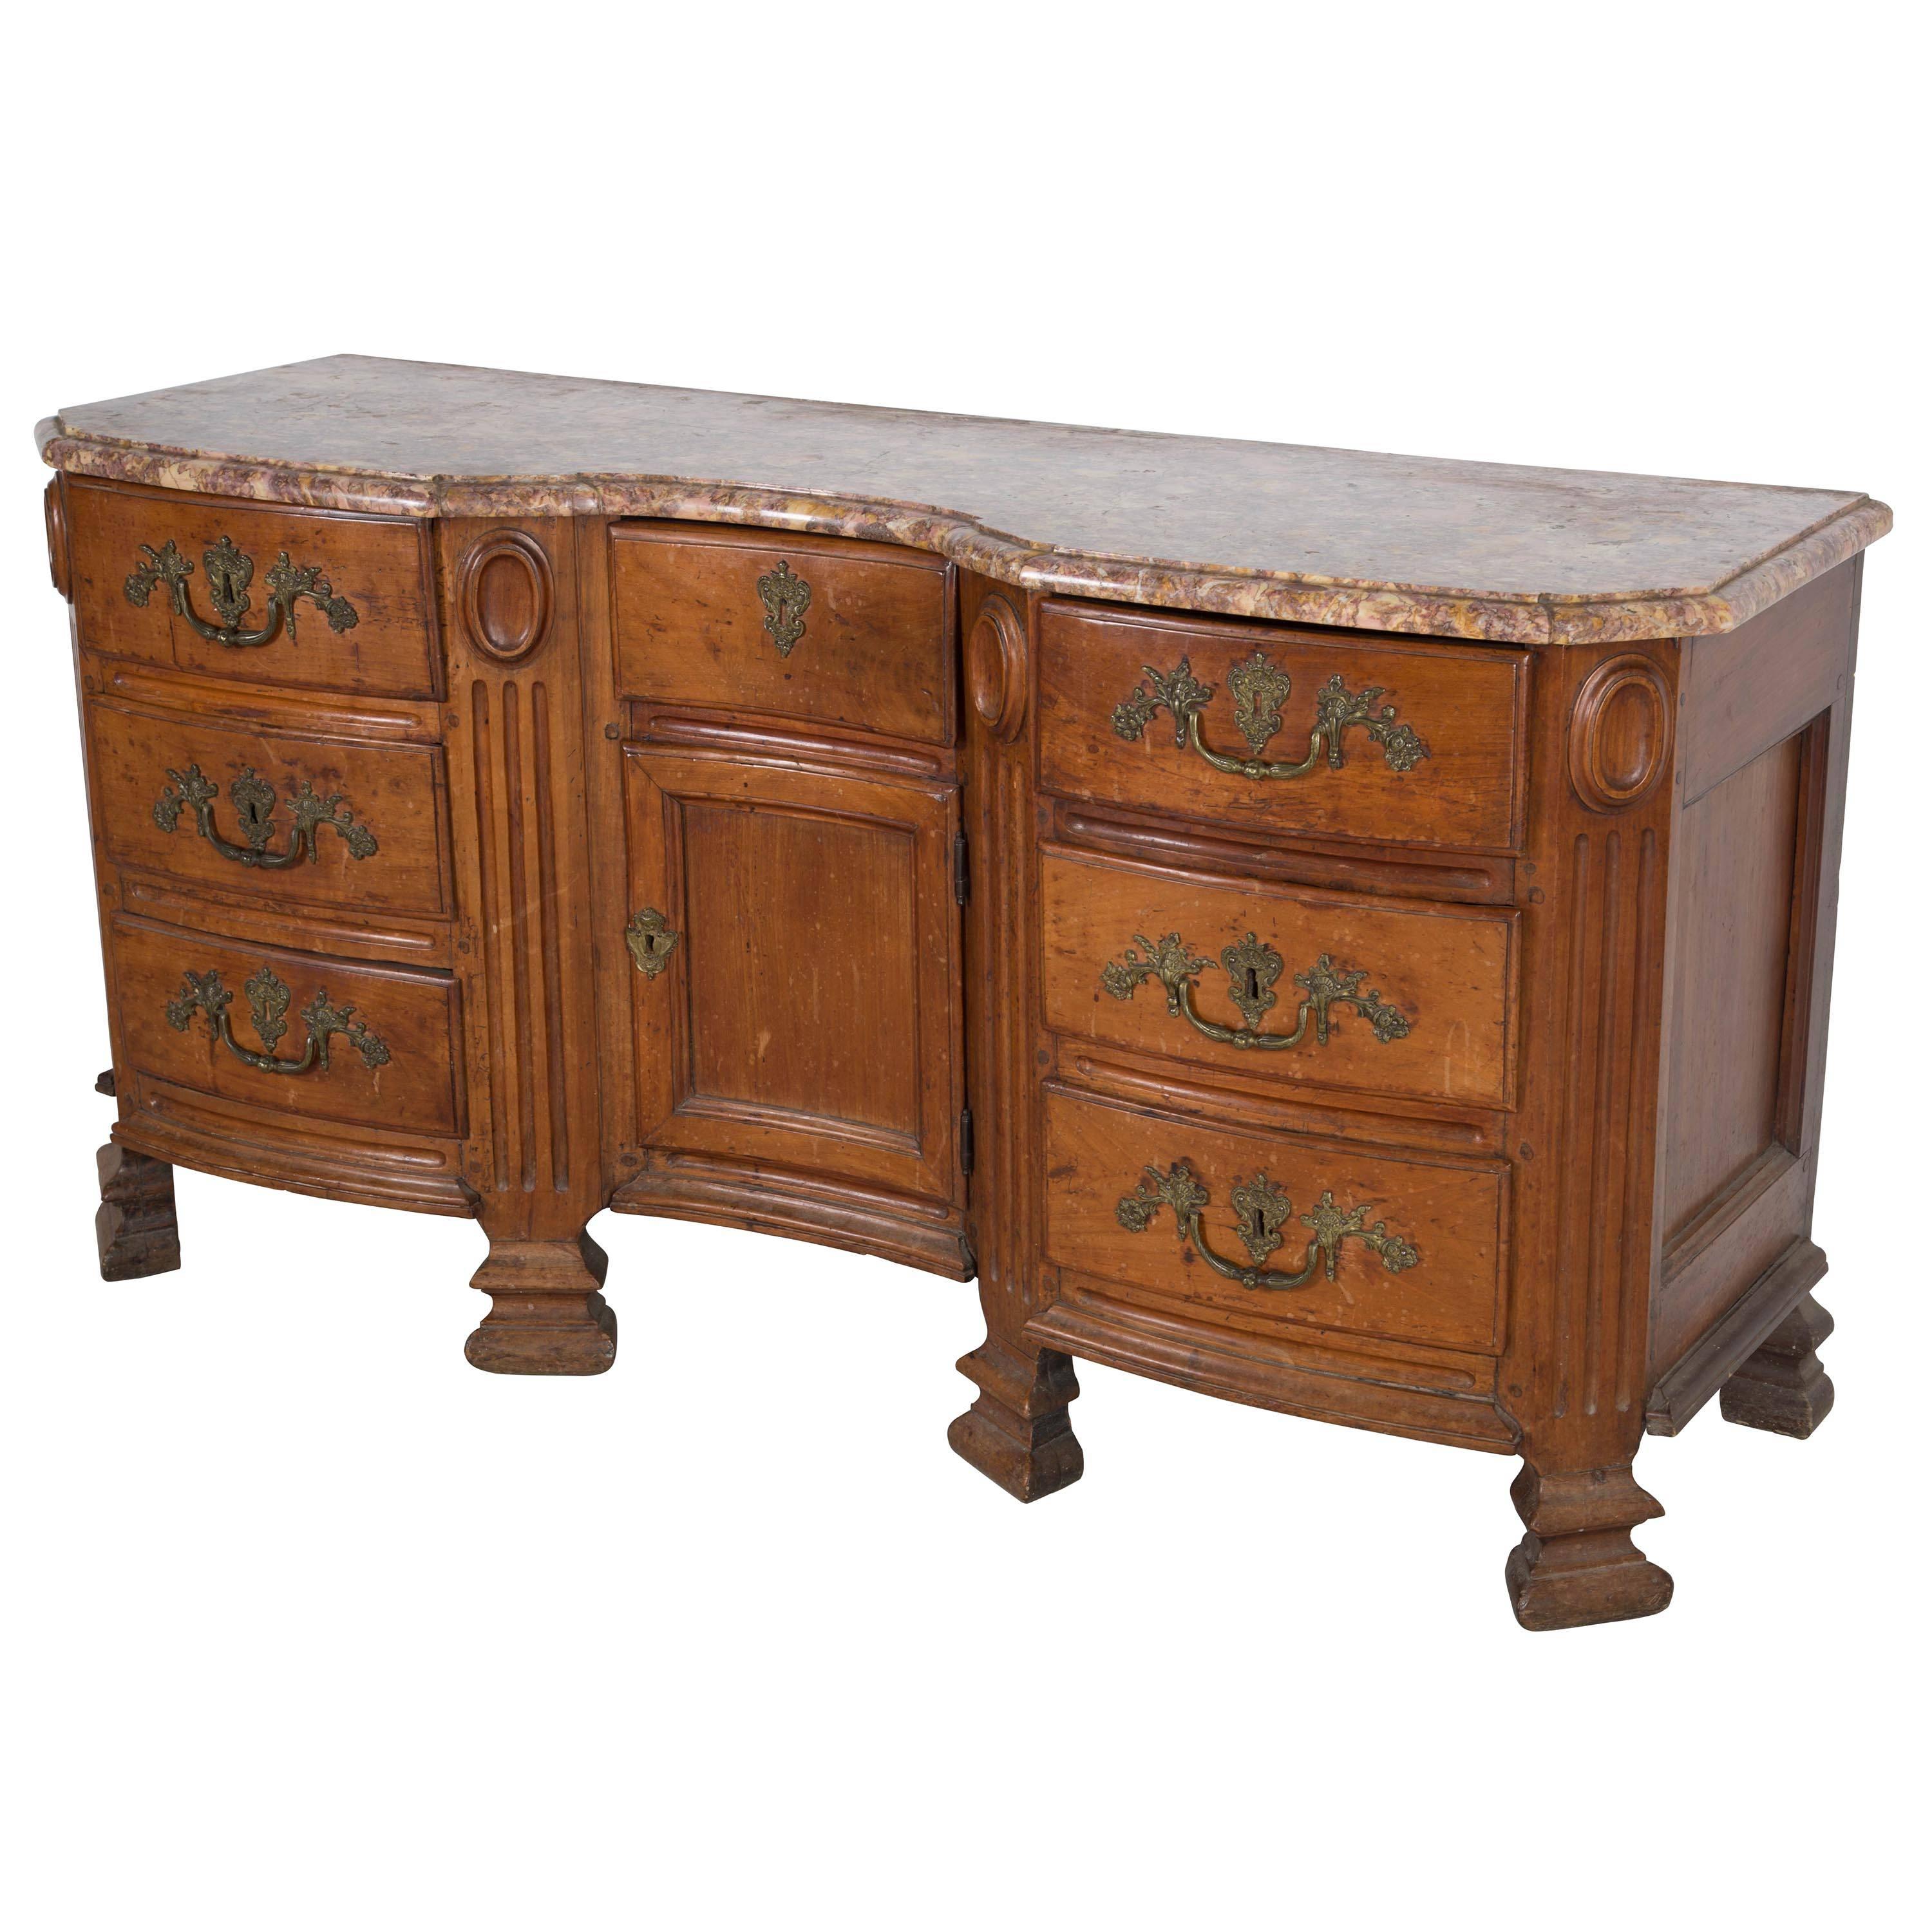 A late 19th century cheery wood and marble topped commode.